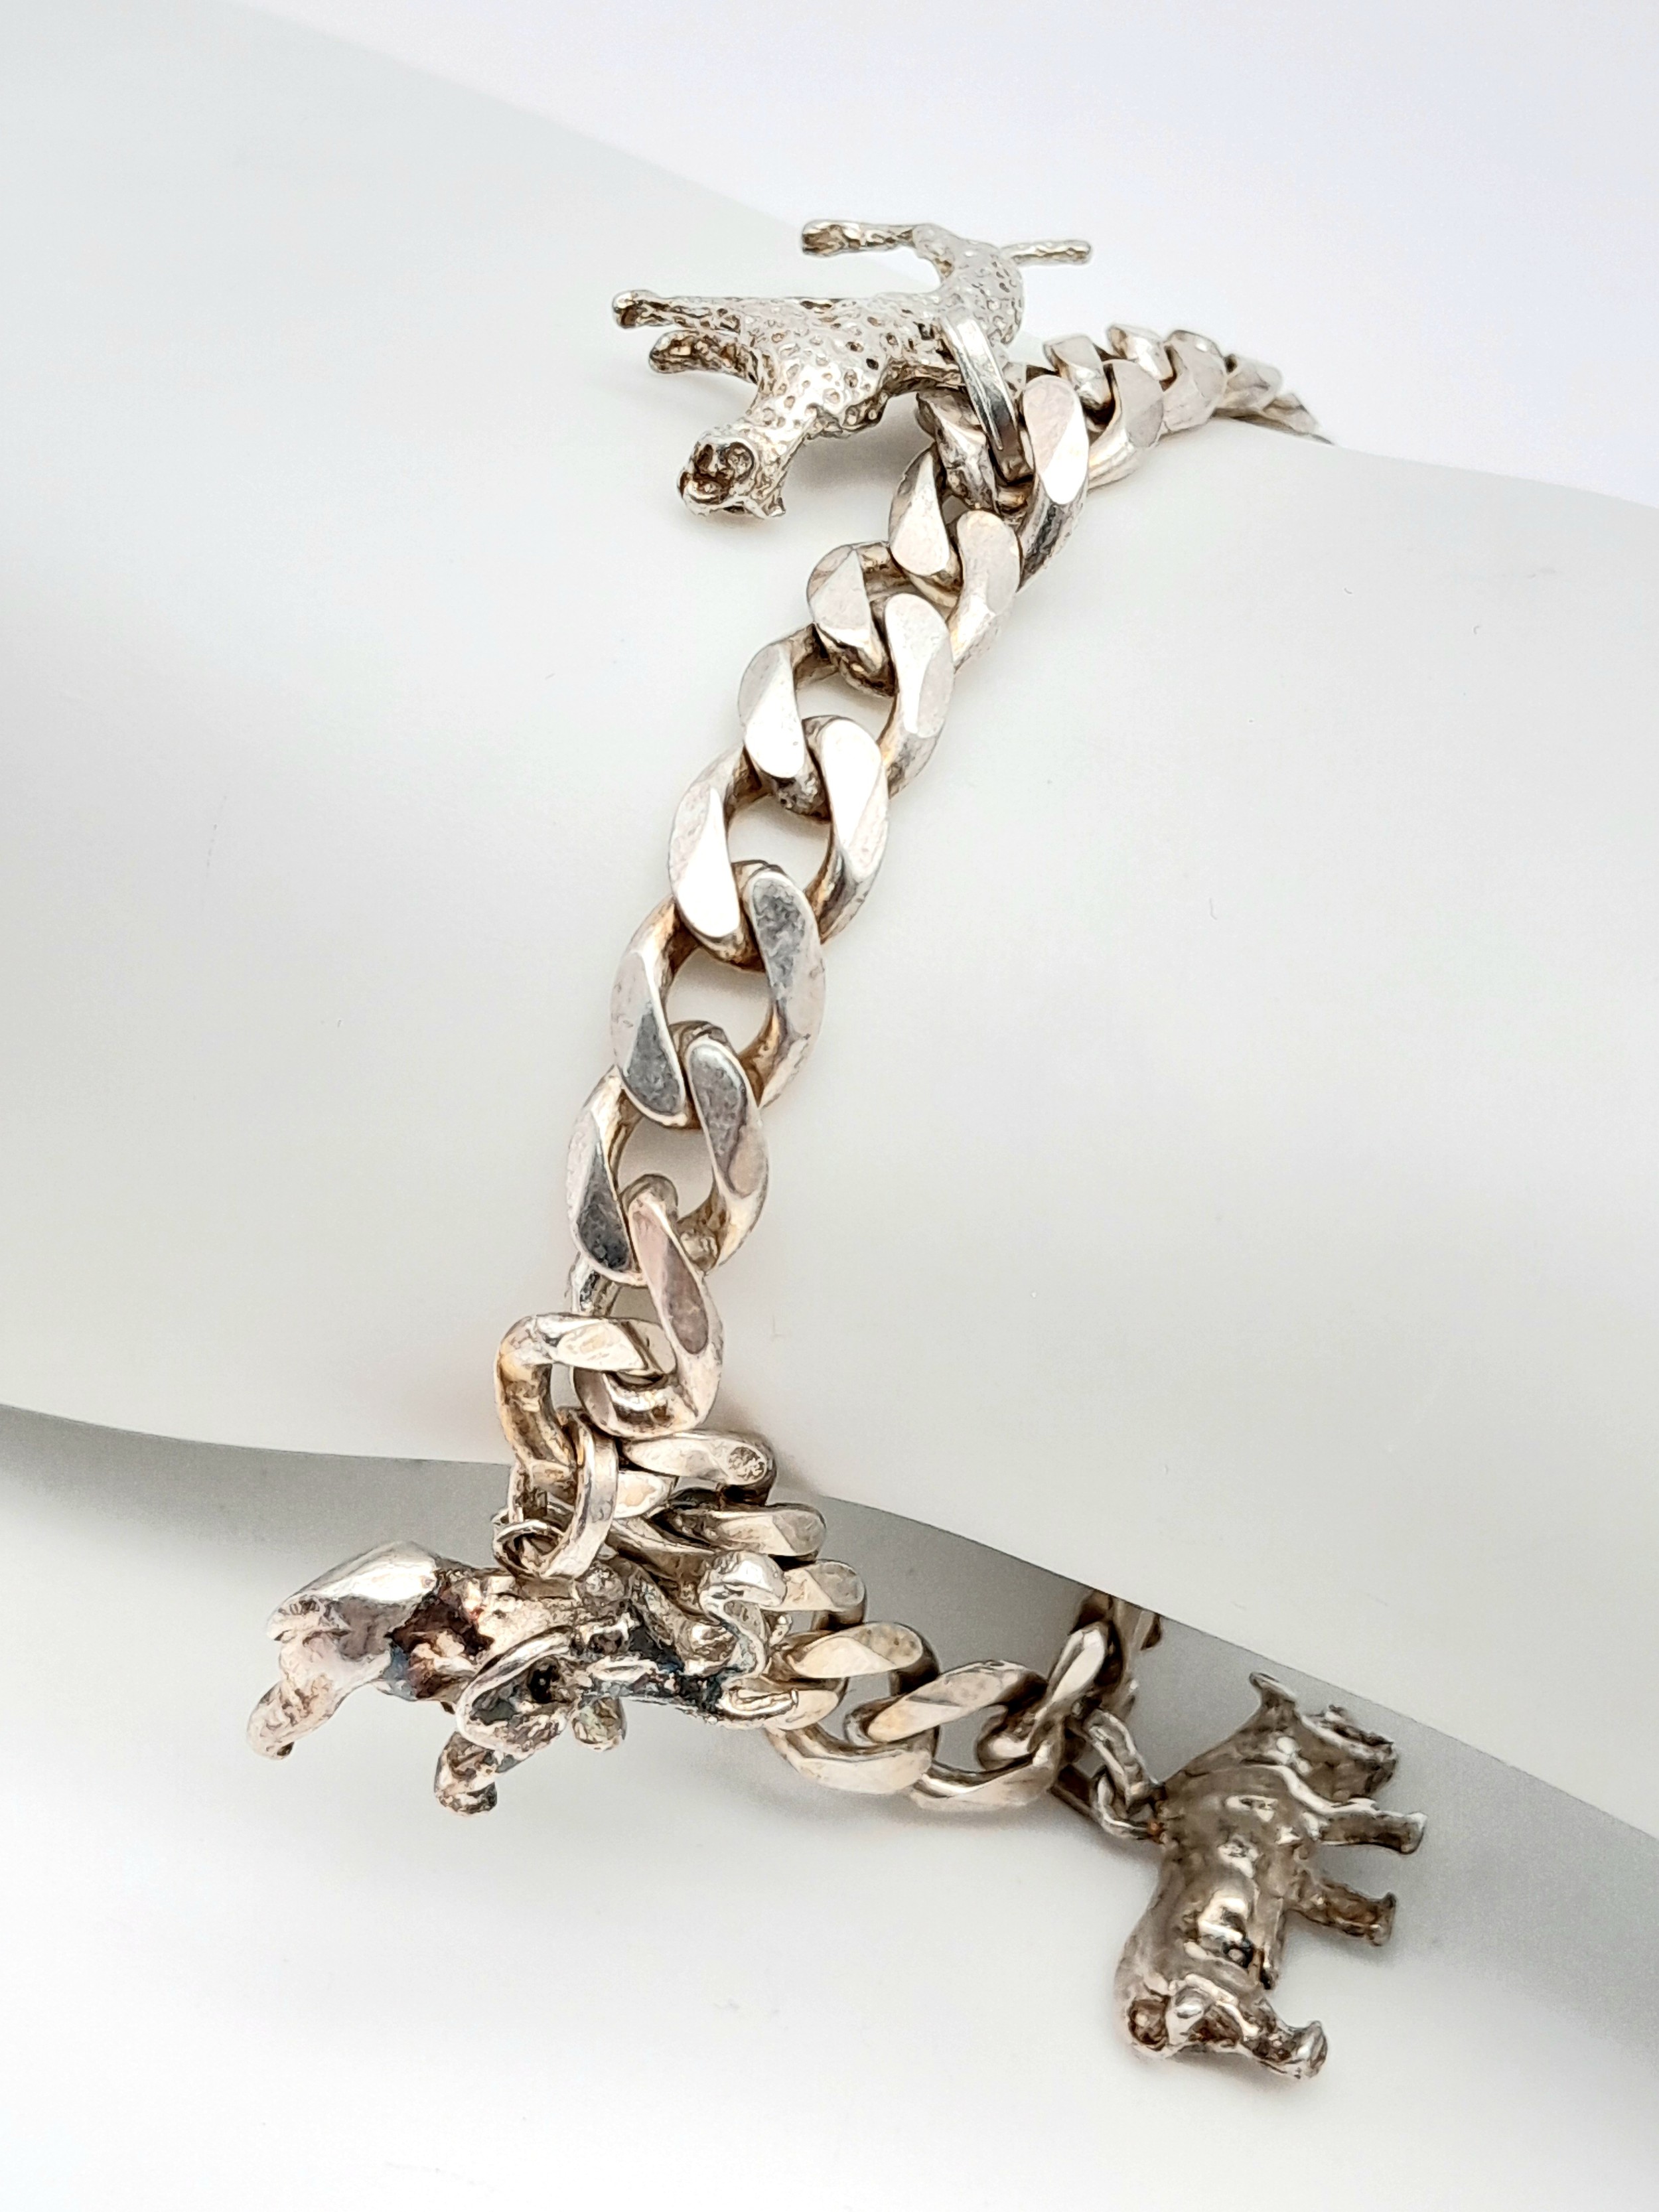 A LOVELY STARTER SILVER CHARM BRACELET WITH 5 ANIMAL CHARMS WAITING TO BE ADDED TO . 38.7gms - Image 3 of 4